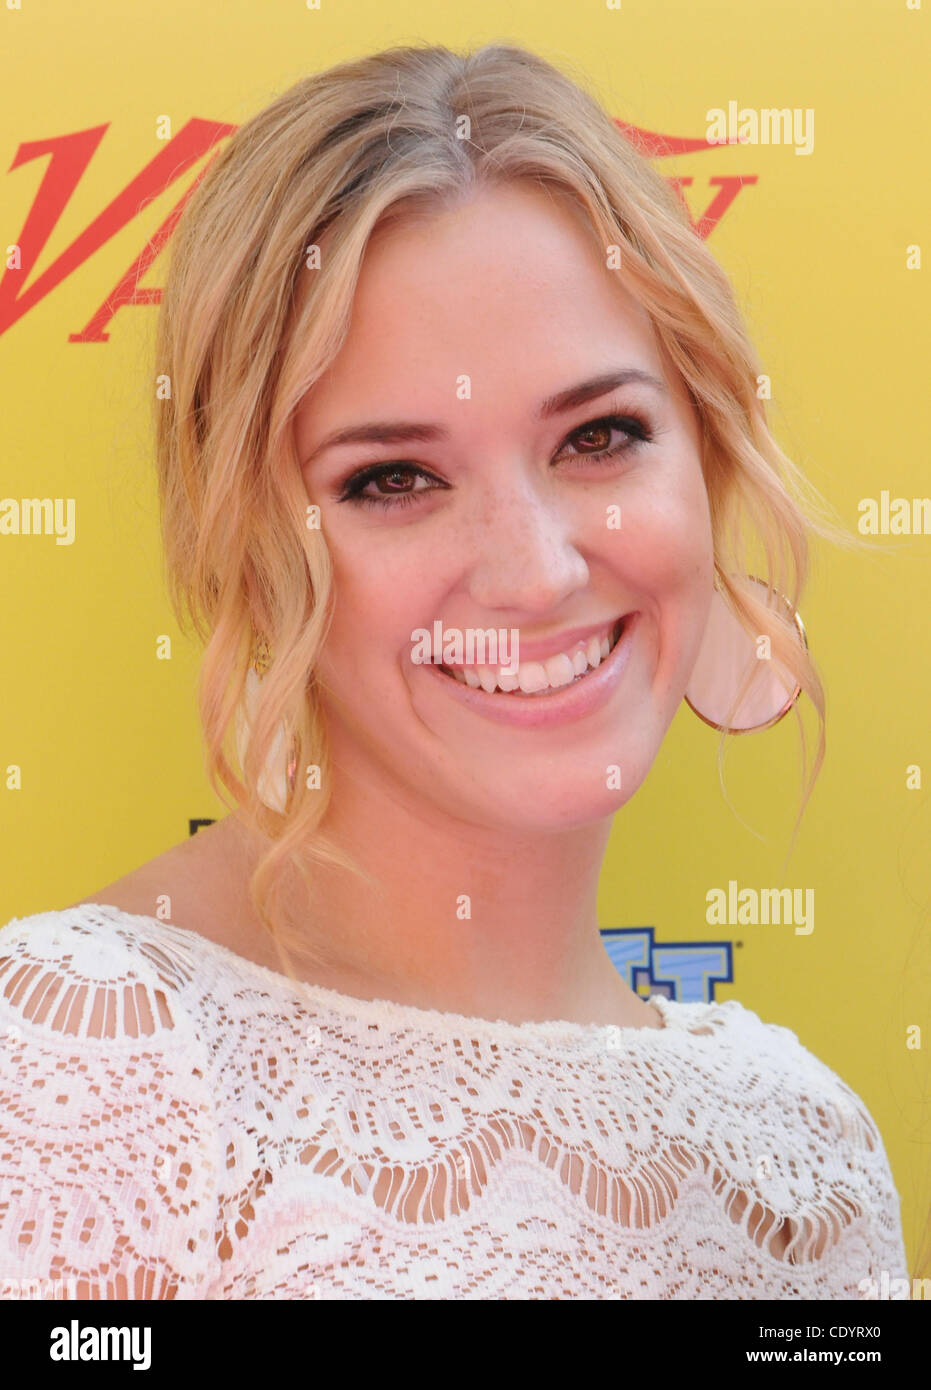 Oct. 22, 2011 - Los Angeles, California, U.S. - Andrea Bowen Attending The Variety's 5th Annual Power Of Youth Event held at the Paramount Studios in Hollywood, California on 10/22/11. 2011(Credit Image: © D. Long/Globe Photos/ZUMAPRESS.com) Stock Photo